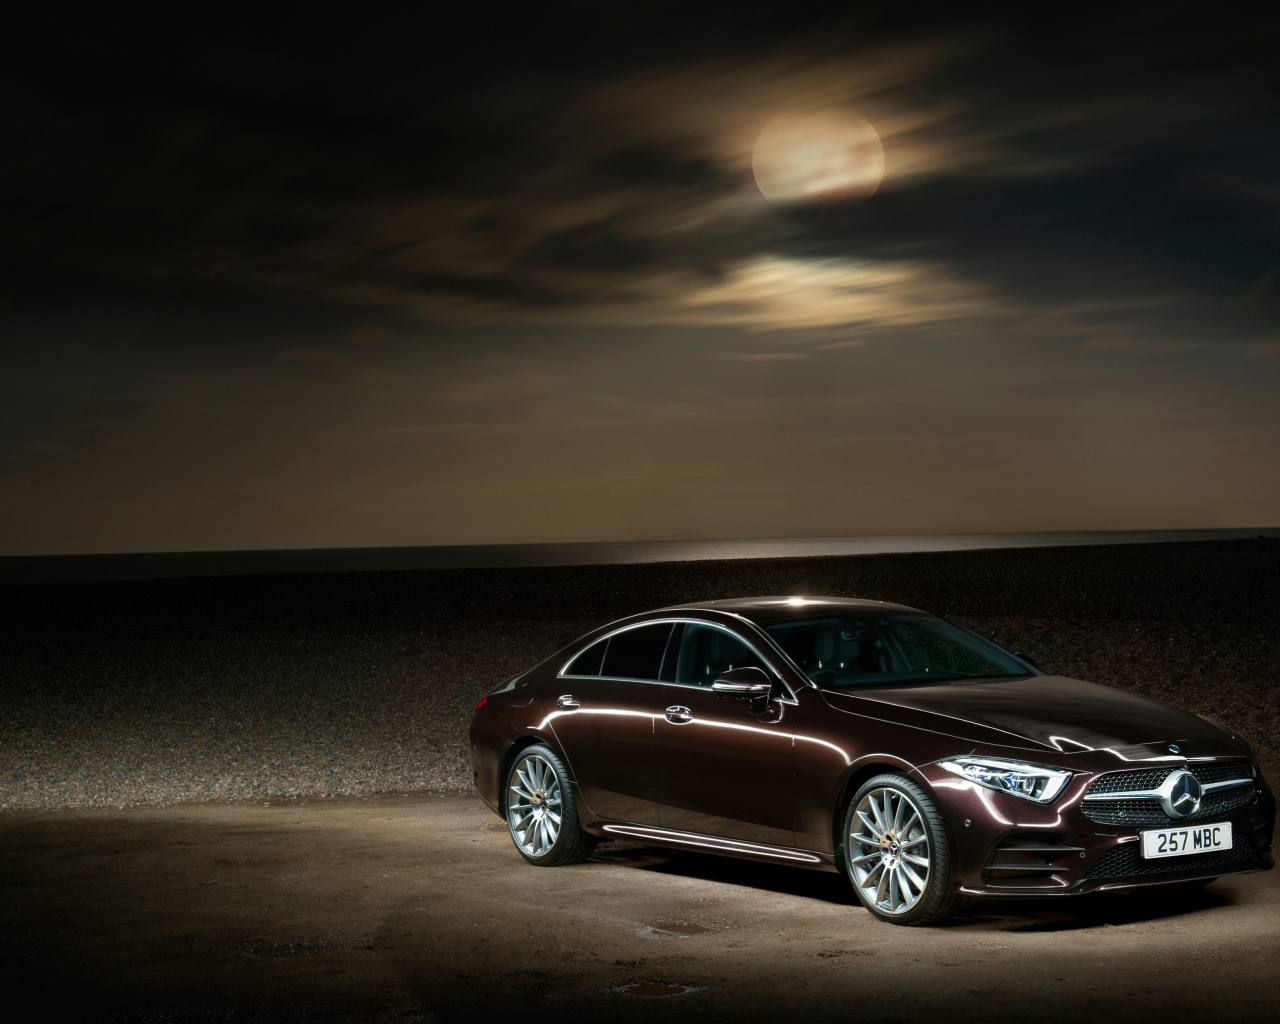 Brown Mercedes Benz CLS 400 D AMG 2018 in the background of the moon